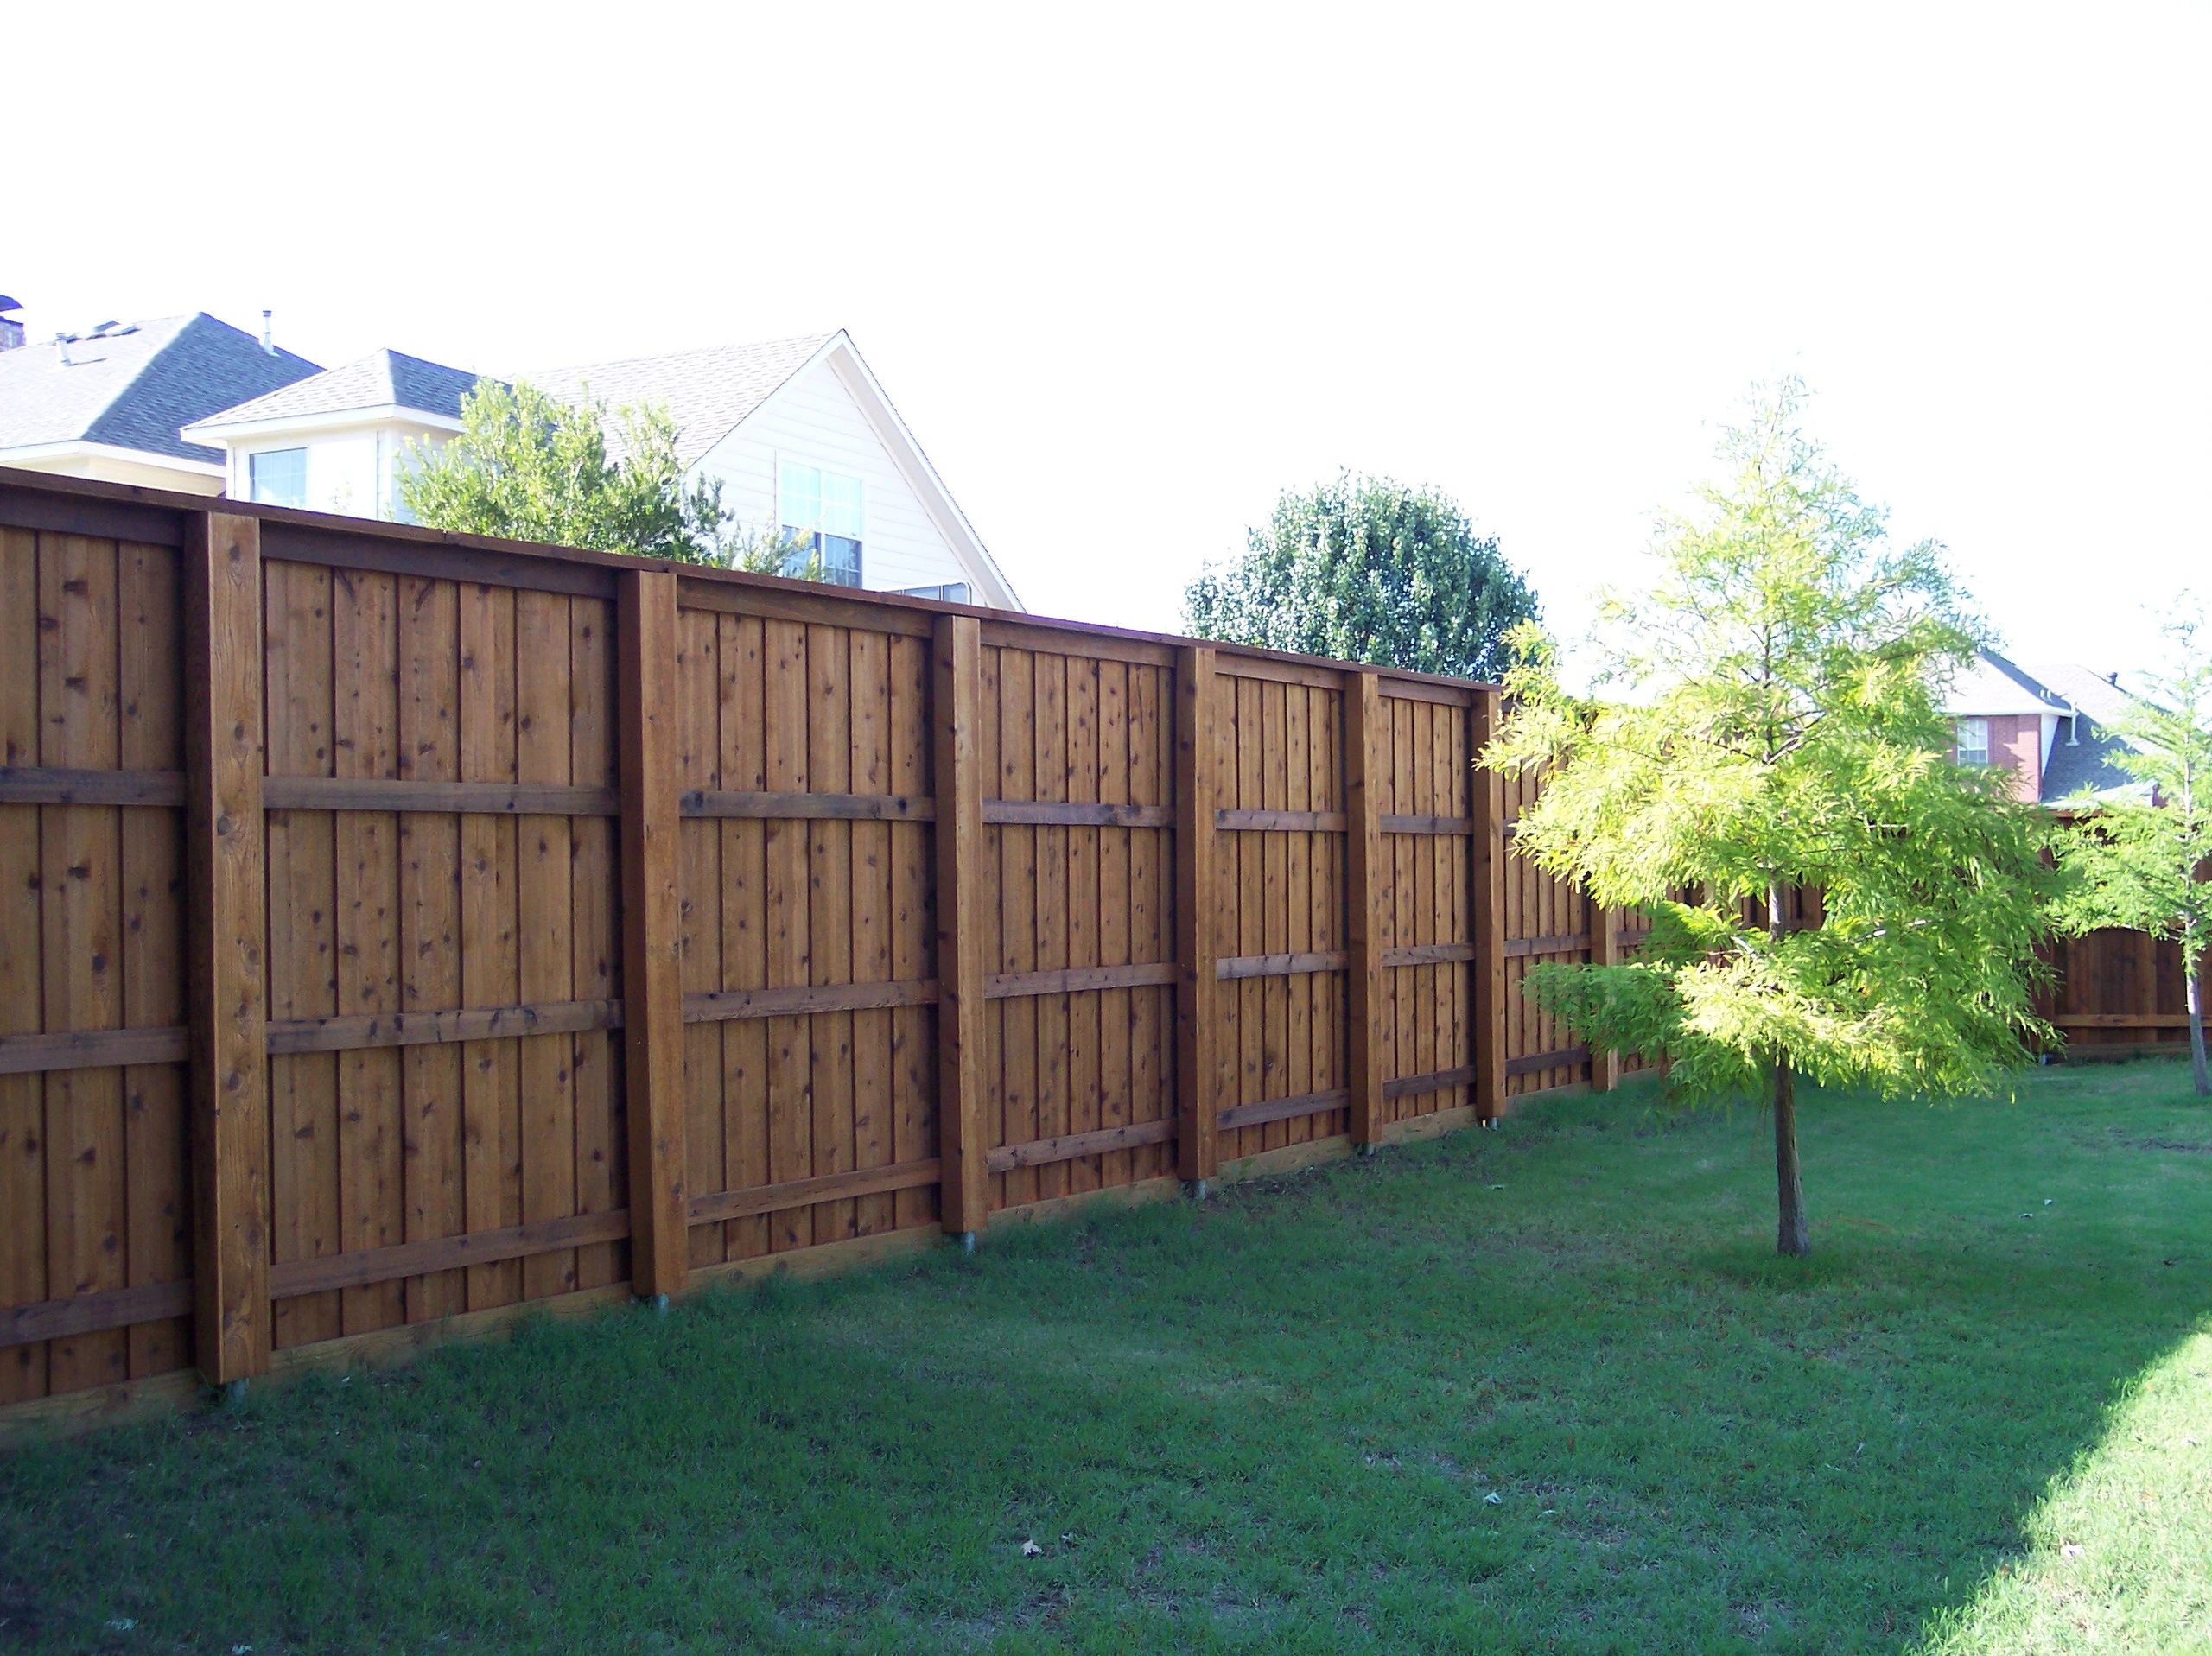 8__cedar_fence_with_boxed_posts.JPG